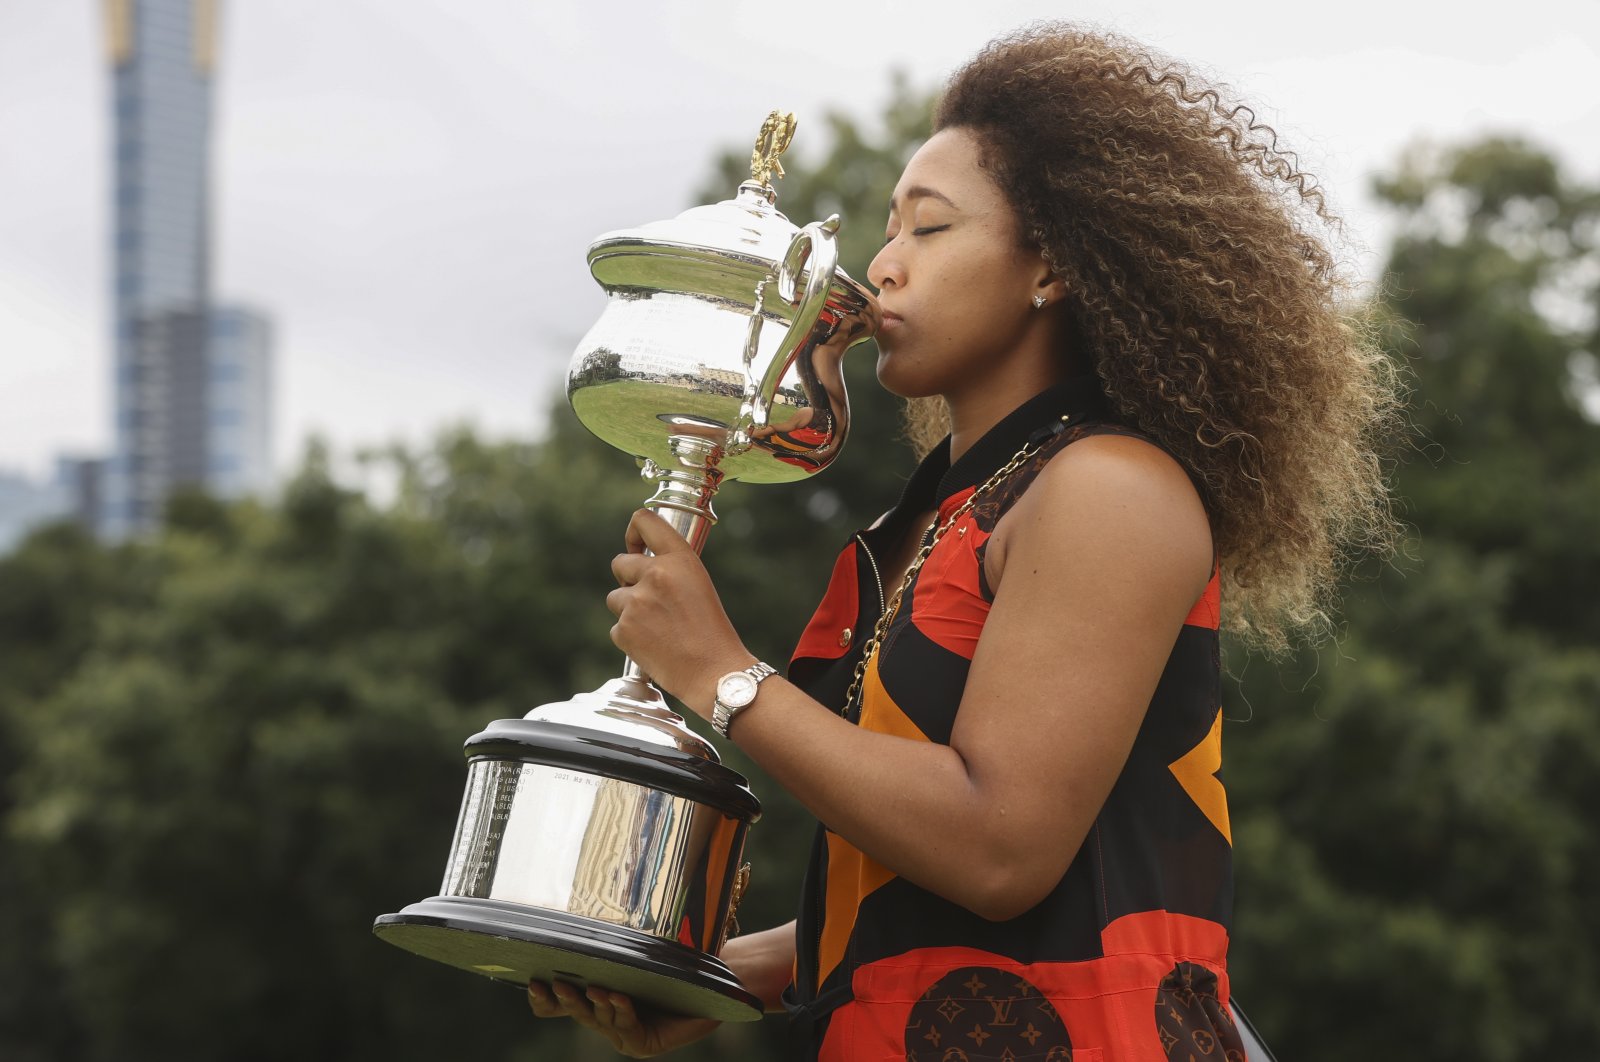 Japan's Naomi Osaka kisses the Daphne Akhurst Memorial Cup during a photo shoot after defeating U.S.' Jennifer Brady in the Australian Open women's singles final in Melbourne, Australia, Sunday, Feb. 21, 2021. (AP Photo)